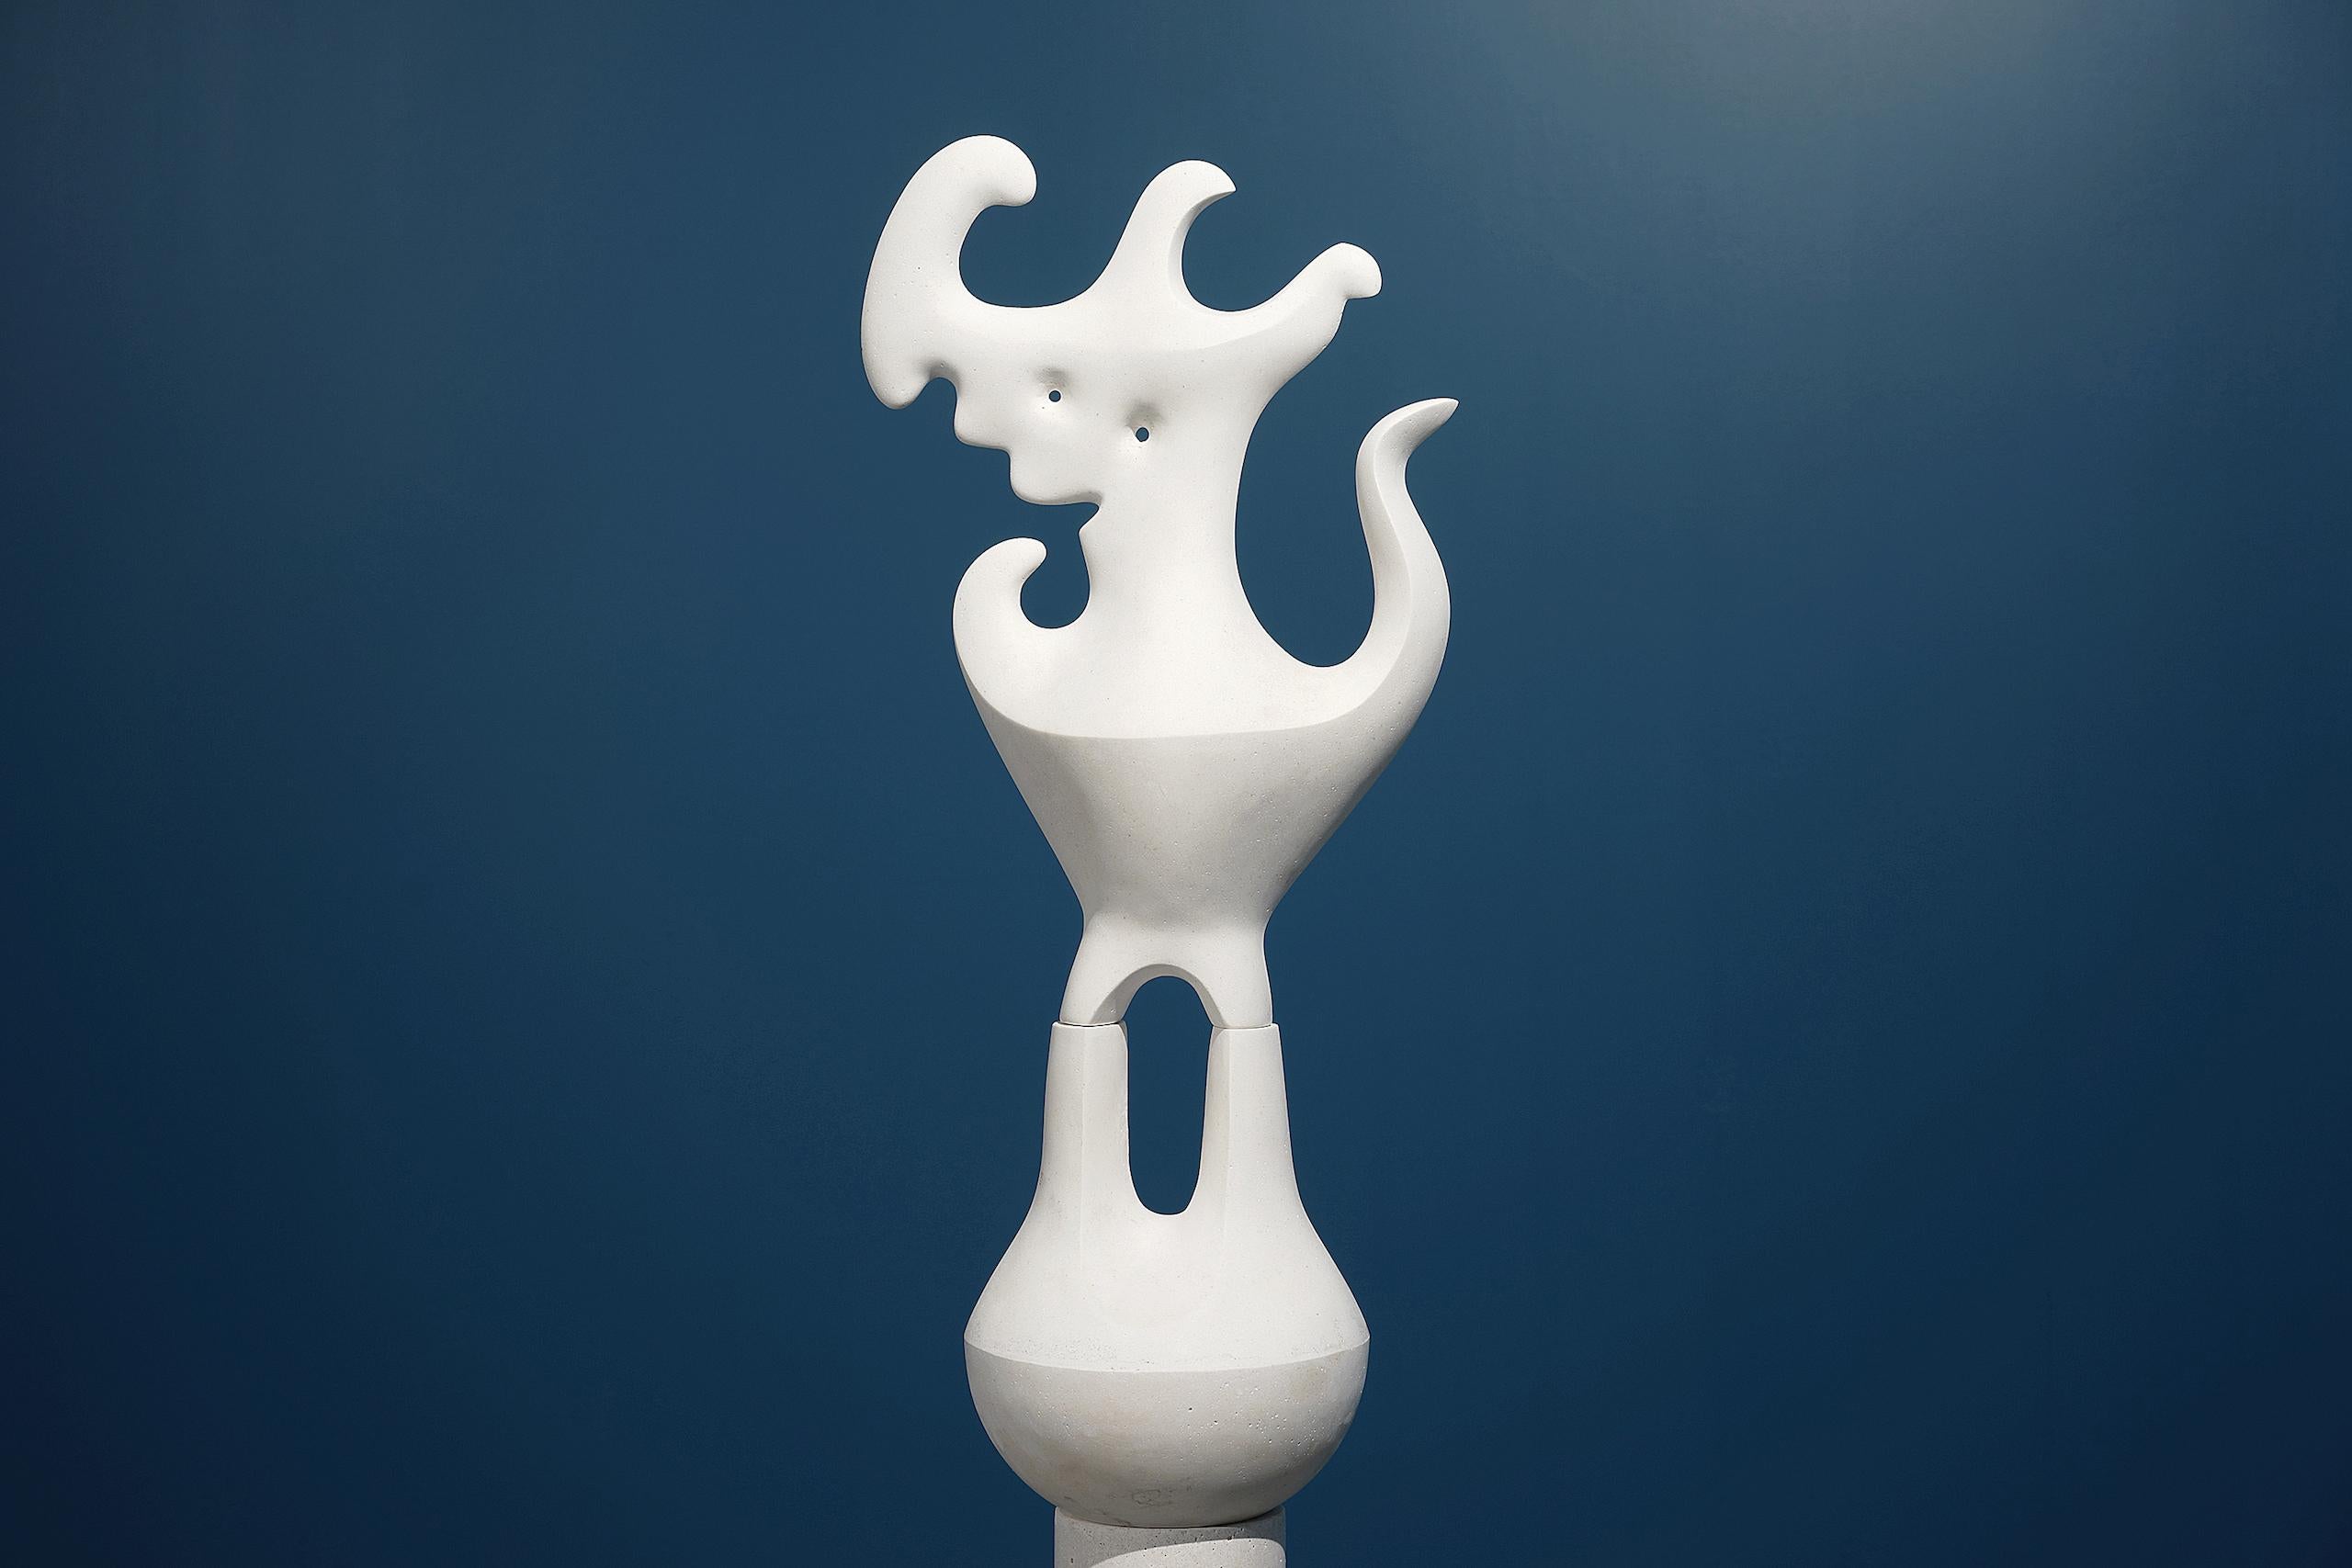 White Amphora is a unique polished artificial stone sculpture by contemporary artist Pavlína Kvita, dimensions including brass base are 165 cm × 50 cm × 50 cm (65 × 19.7 × 19.7 in). The sculpture is signed and comes with a certificate of